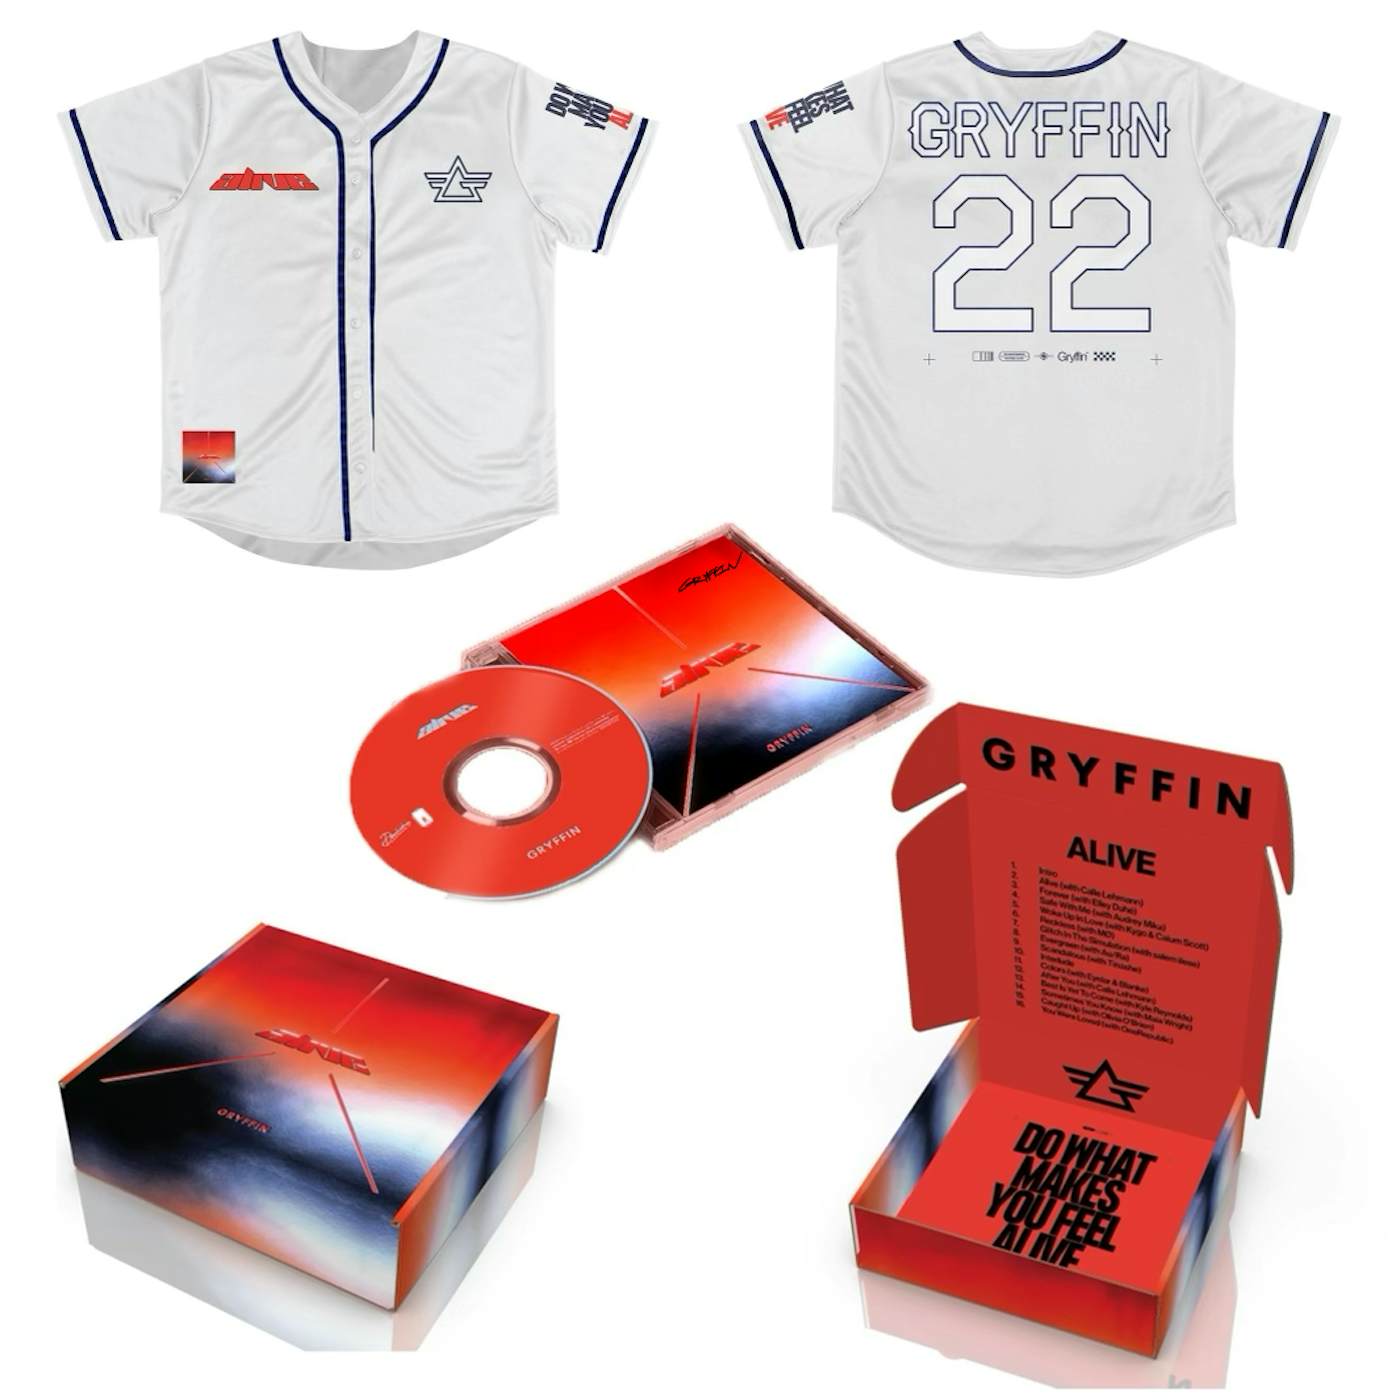 Alive Album Jersey + CD Box Set - Signed by Gryffin